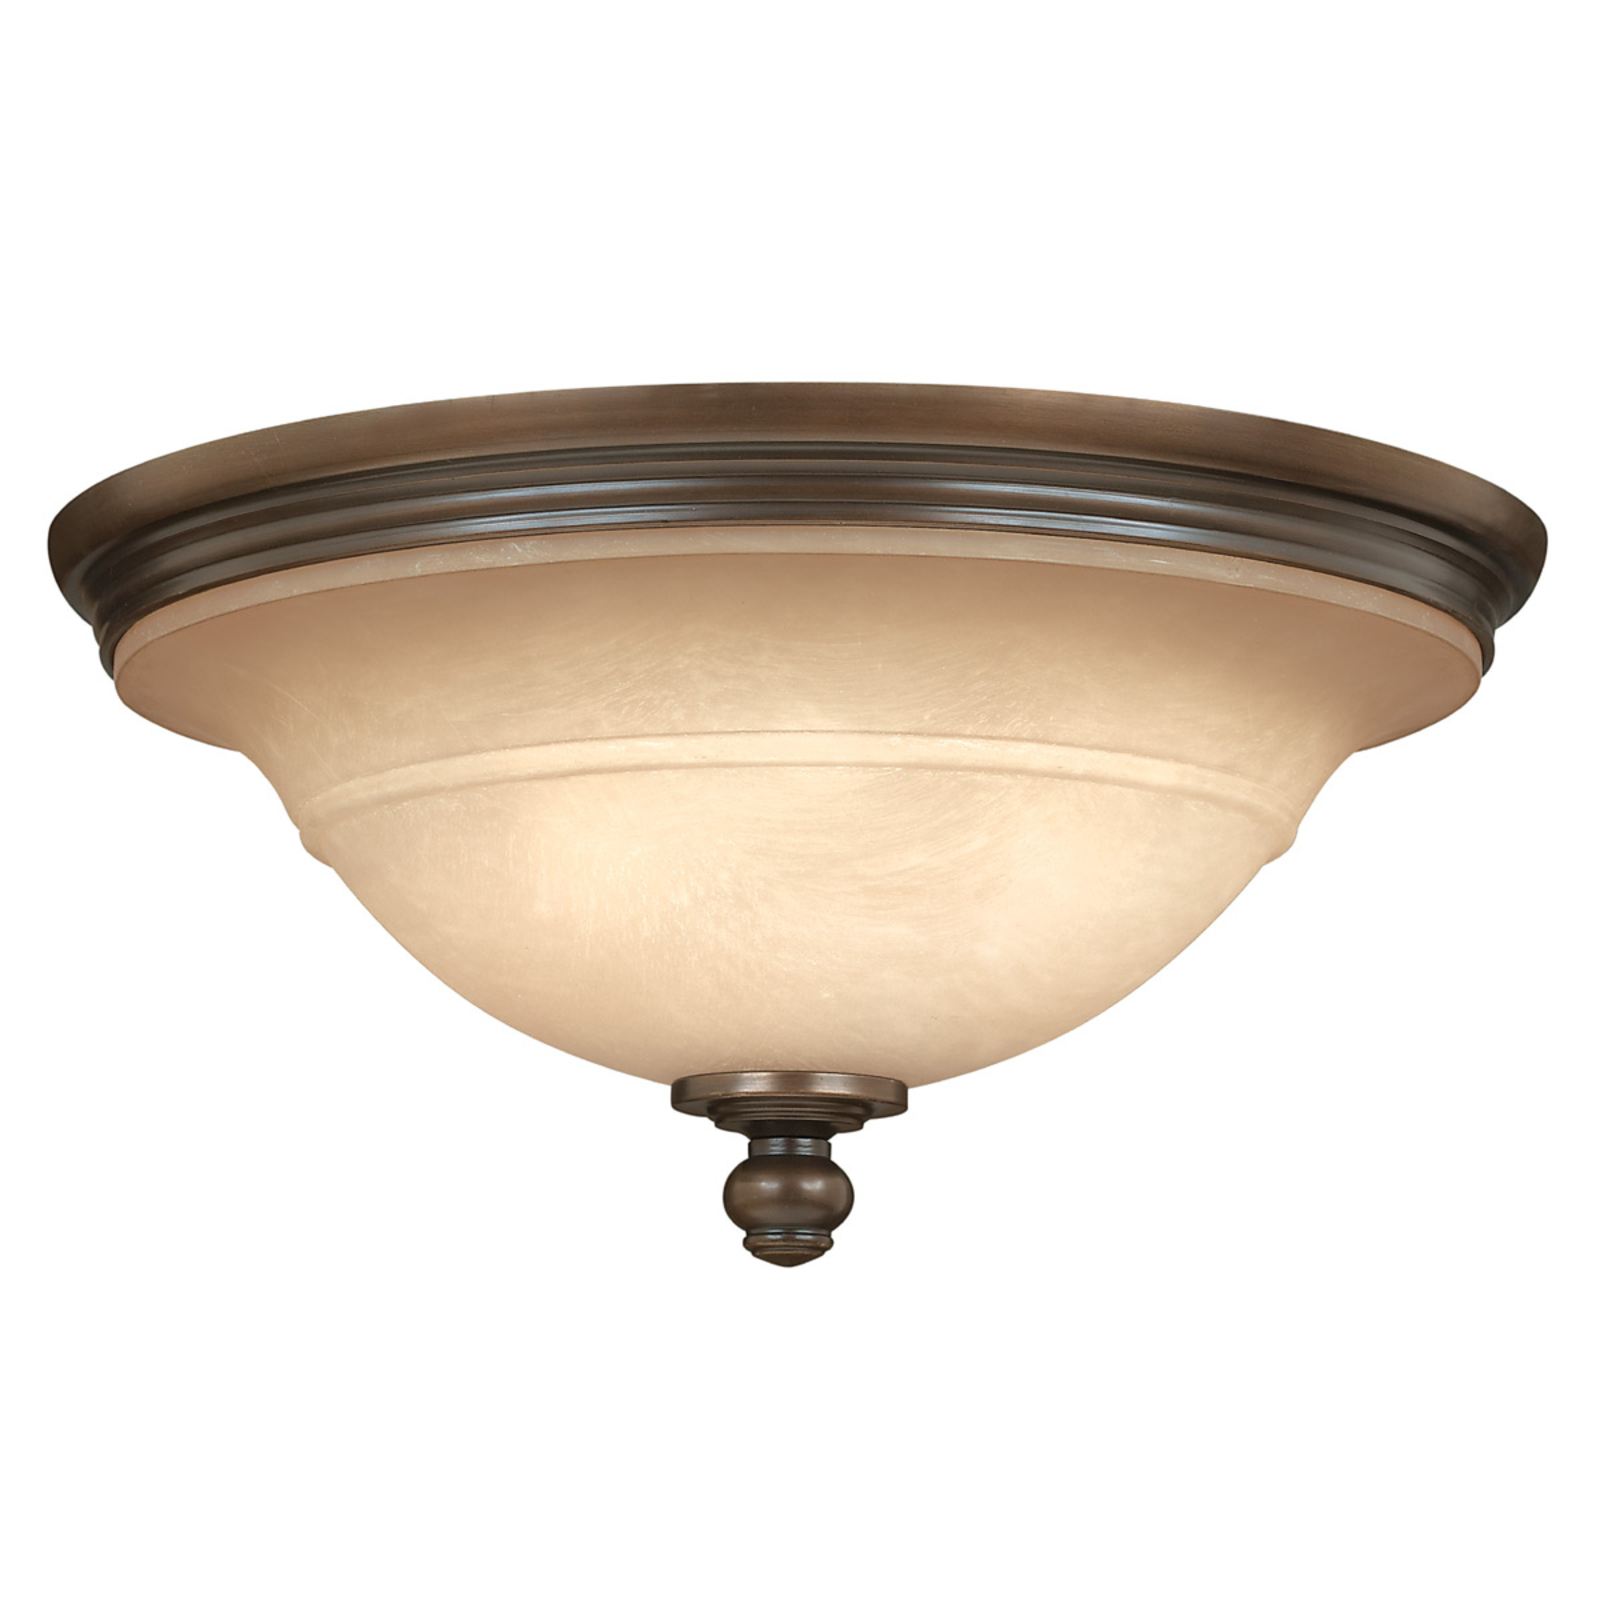 Plymouth Ceiling Light Rustic